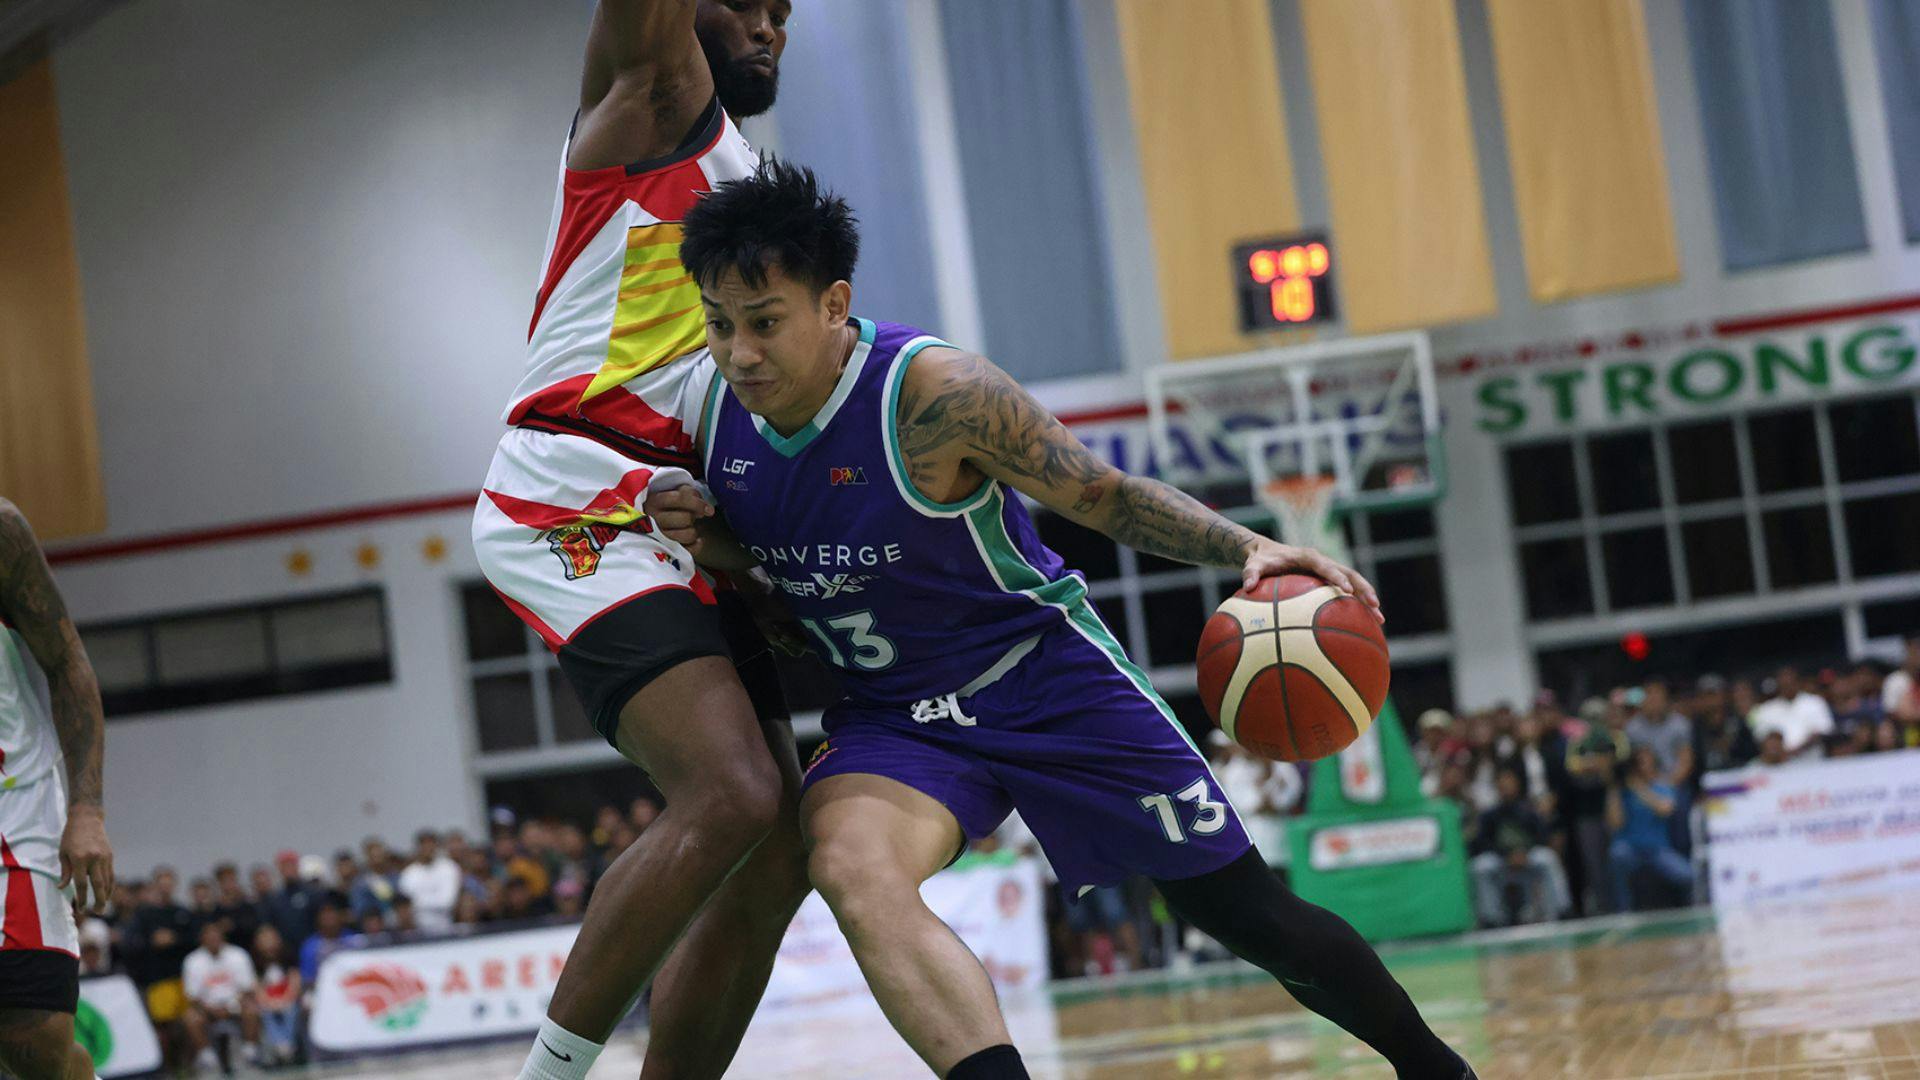 PBA: Converge releases Mac Tallo after playing in "ligang labas" games